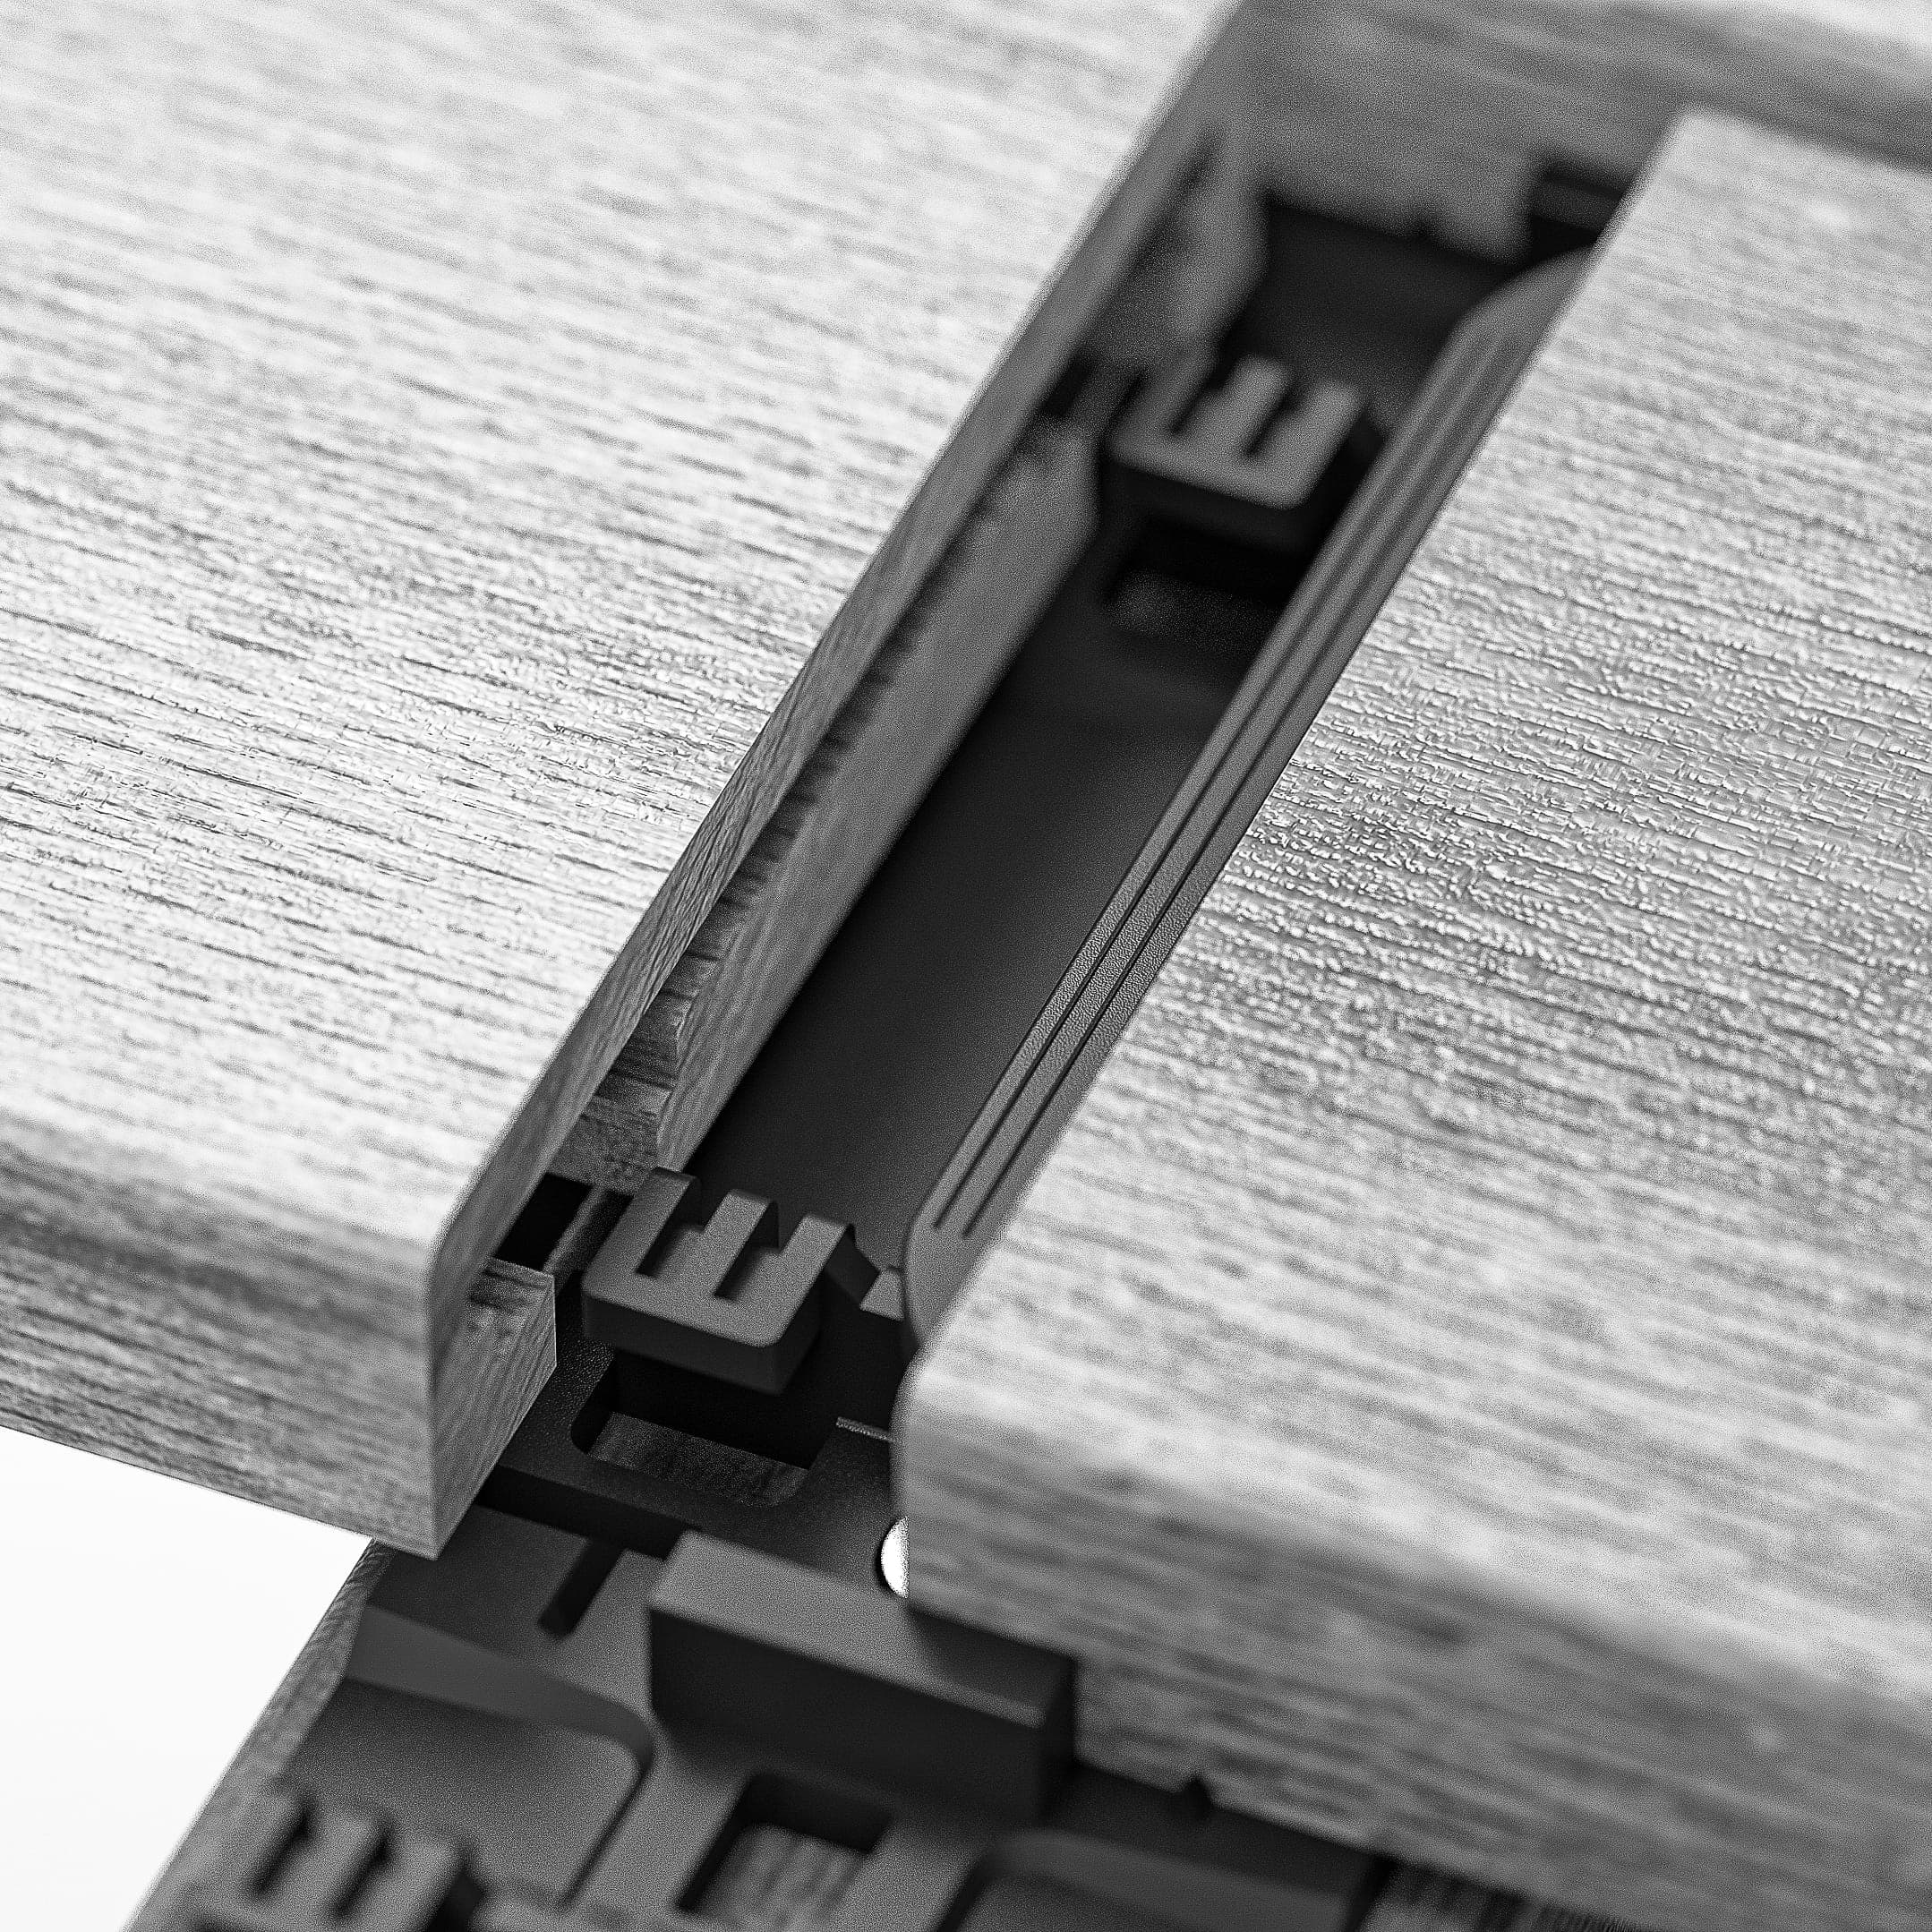 Vetedy introduces its new system of tongue and groove for Softline decking system